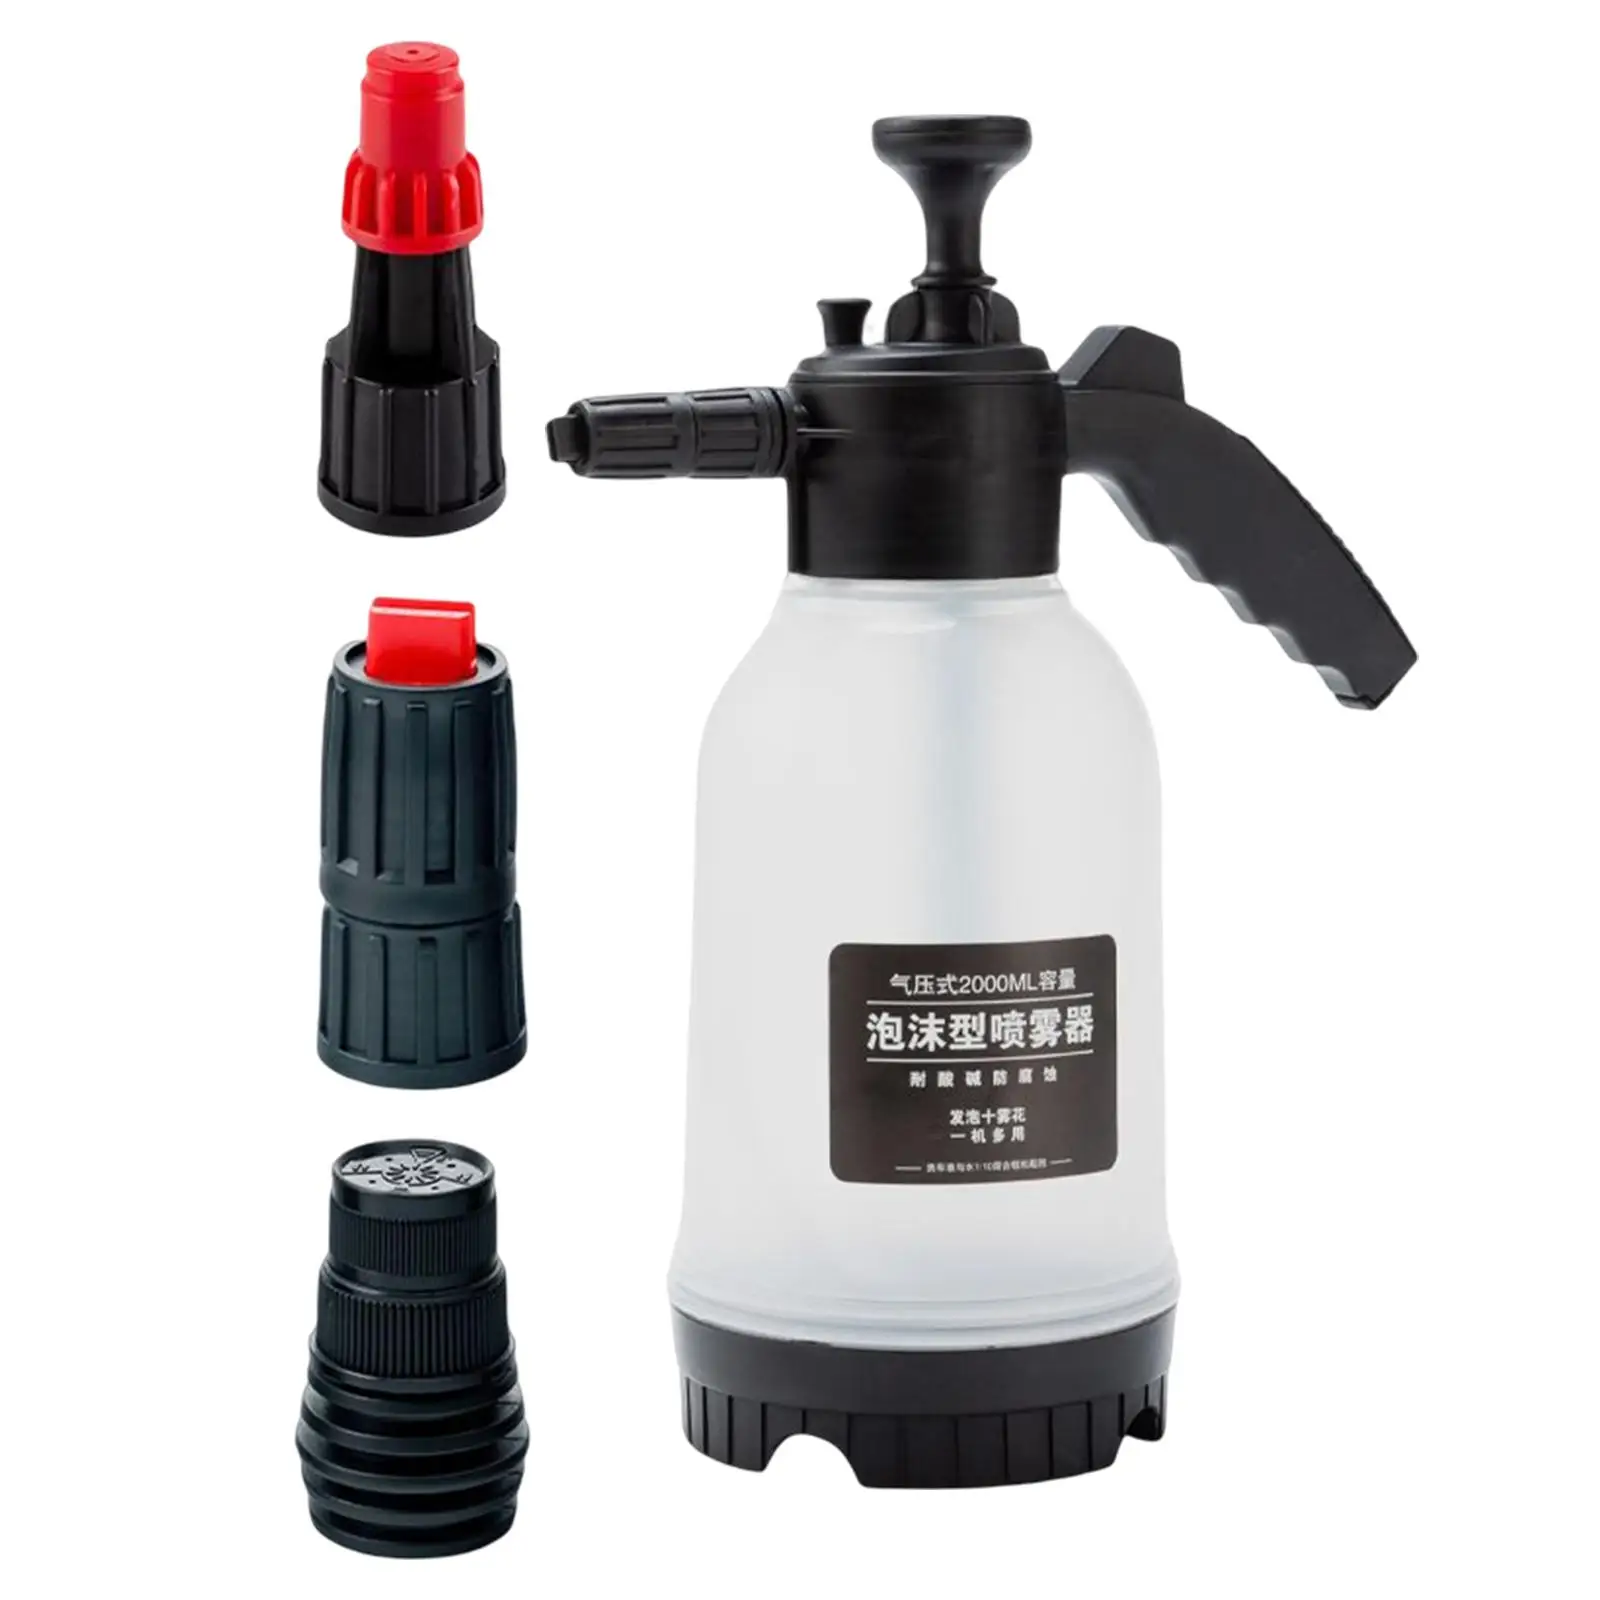 2L Car Wash Pump Foaming Sprayer Multifunction Continuous Manual Lance Water Sprayer for Car Detailing House Cleaning